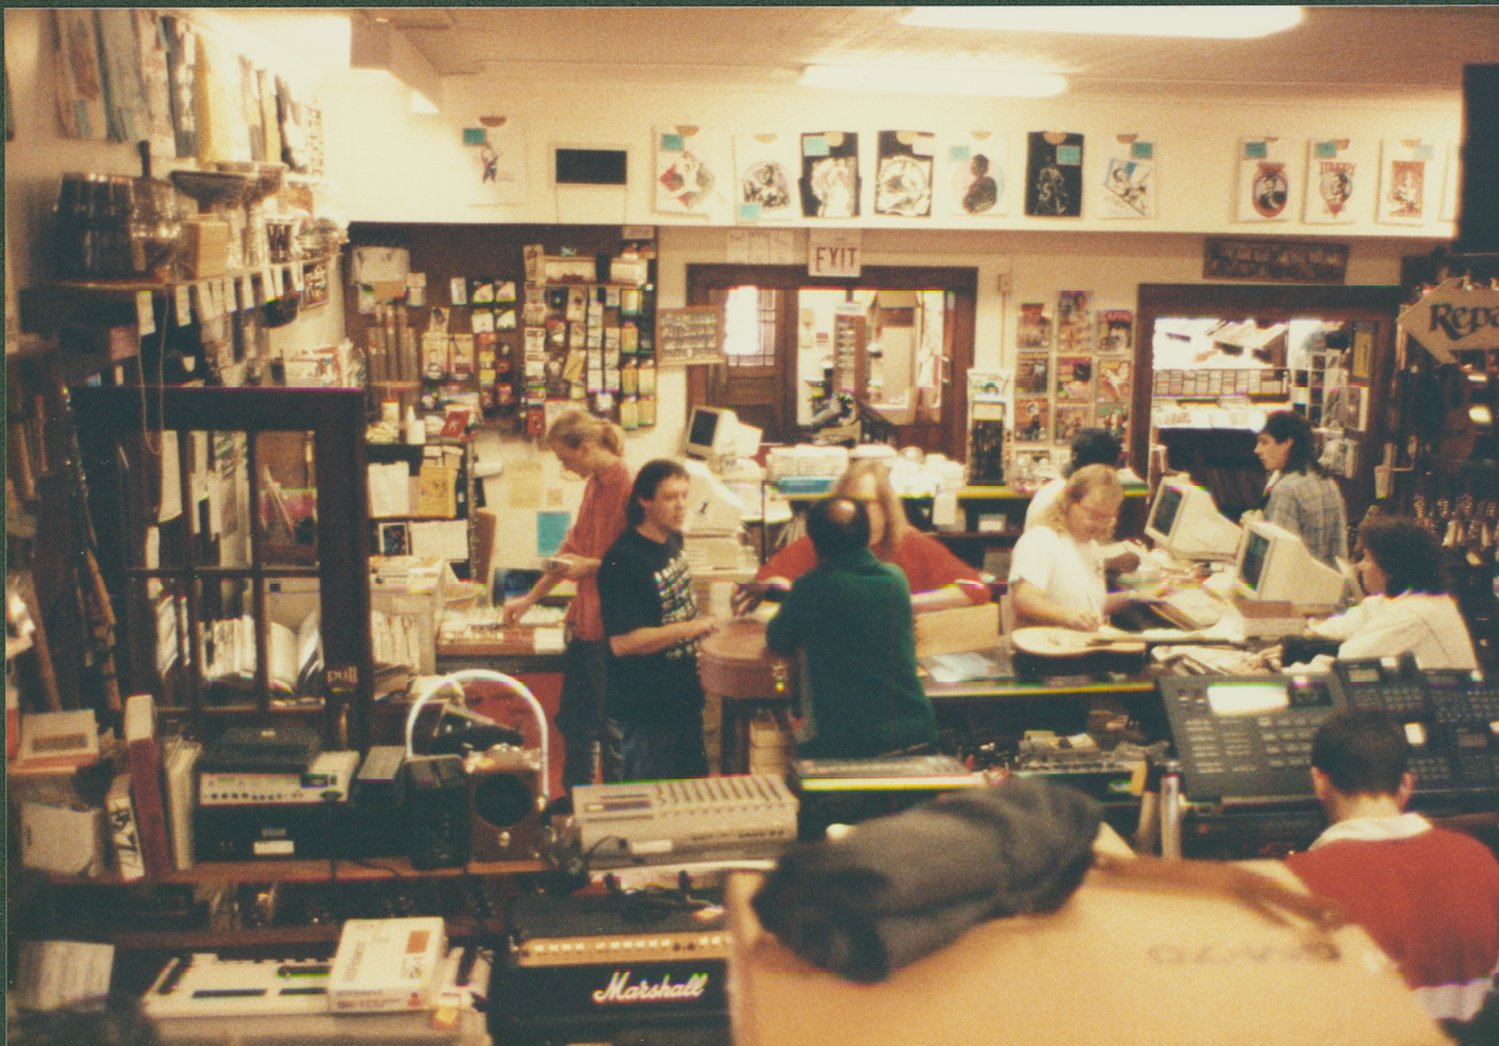 The Elderly Instruments sales floor as it looked in the early 1990s.